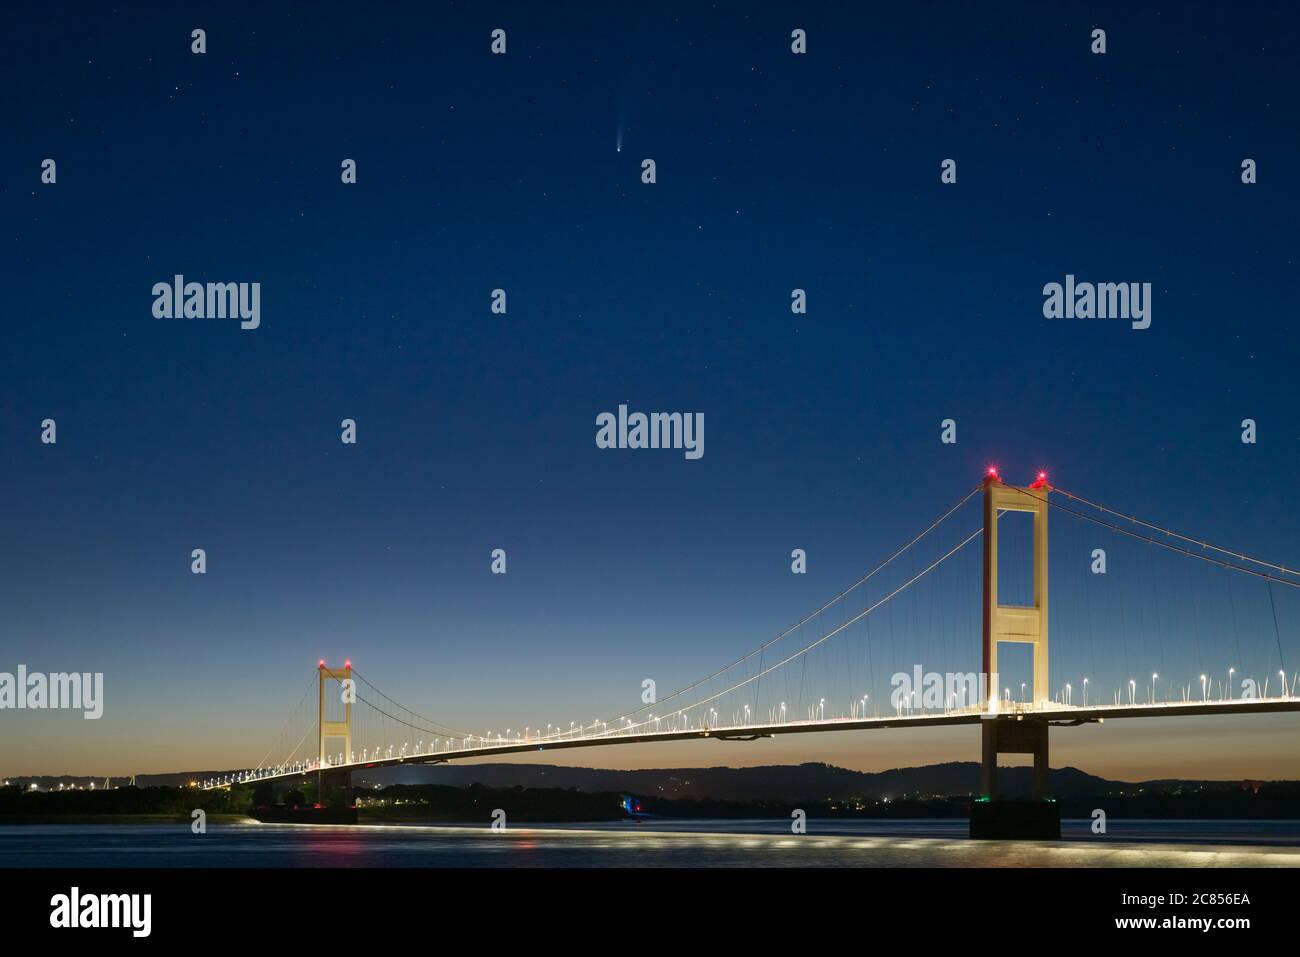 Comet C/2020 F3 Neowise over the Severn Bridge between England and Wales at twilight in July 2020 viewed from the bank of the River Severn at Aust, Gloucestershire, England. Stock Photo